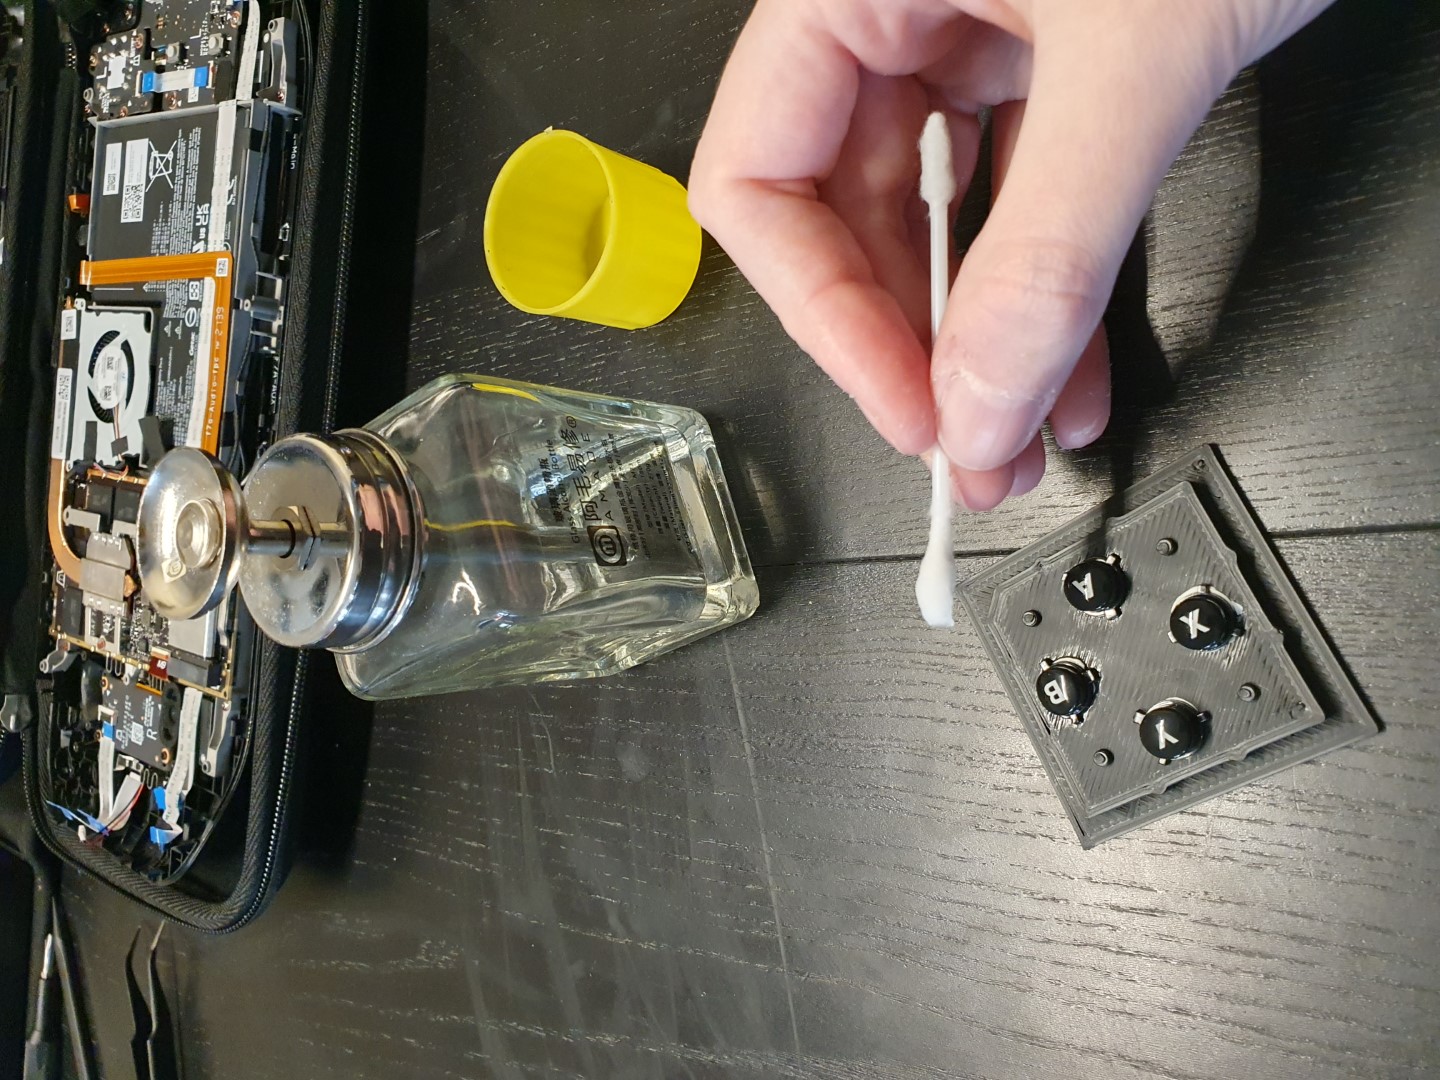 The four action buttons mounted to the keyed mold case bottom. My hand hovering over them with a q-tip, a bottle of isopropyl alcohol in reach. In the background the disassembled deck.